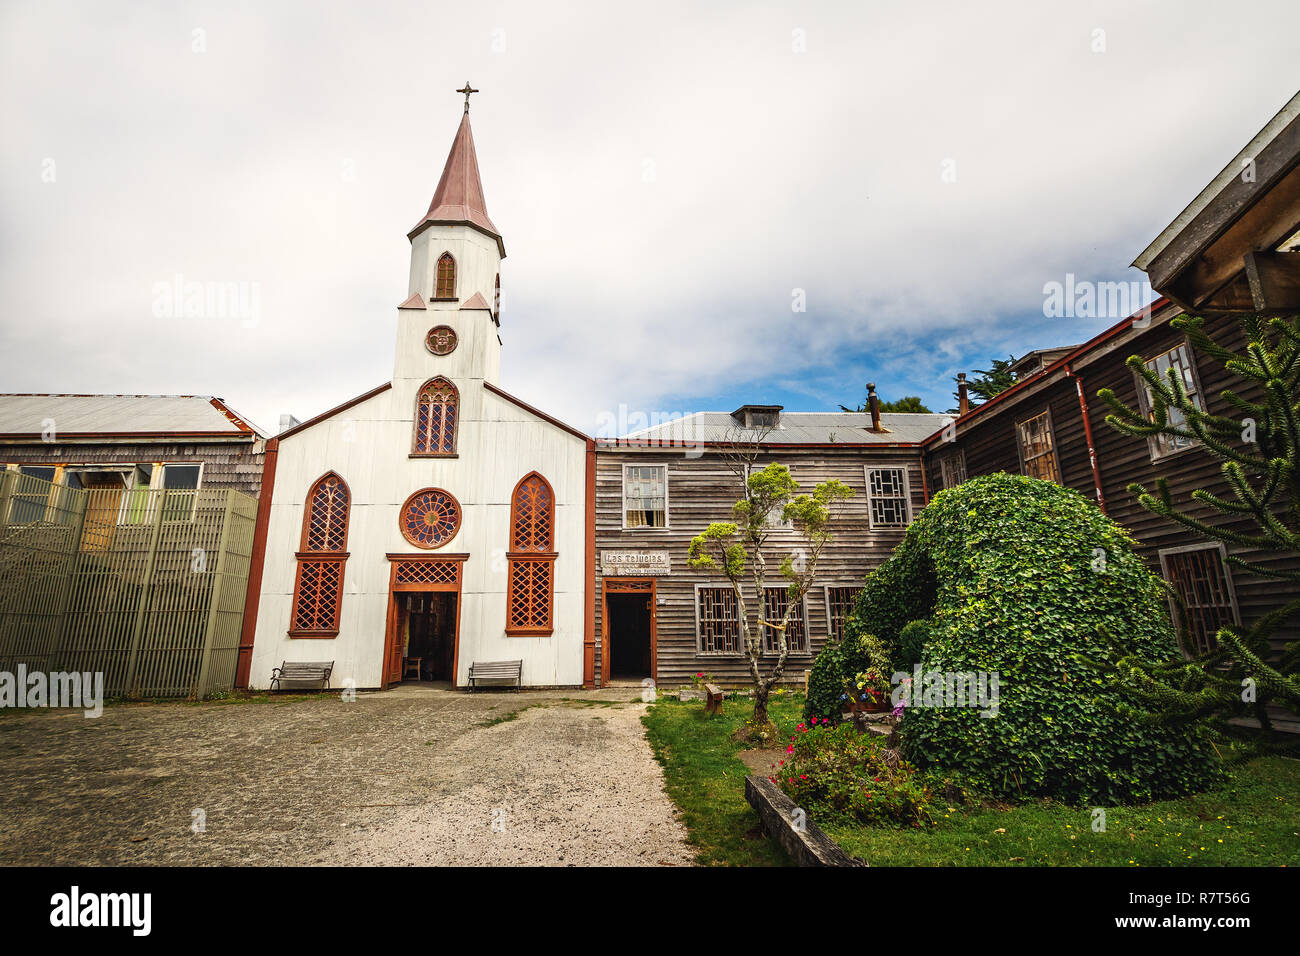 Ancud, Chiloe, Chile - Feb 27, 2018: Chiloe Church Museum and Visitor Center at former Inmaculada Concepcion convent - Ancud, Chiloe Island, Chile Stock Photo